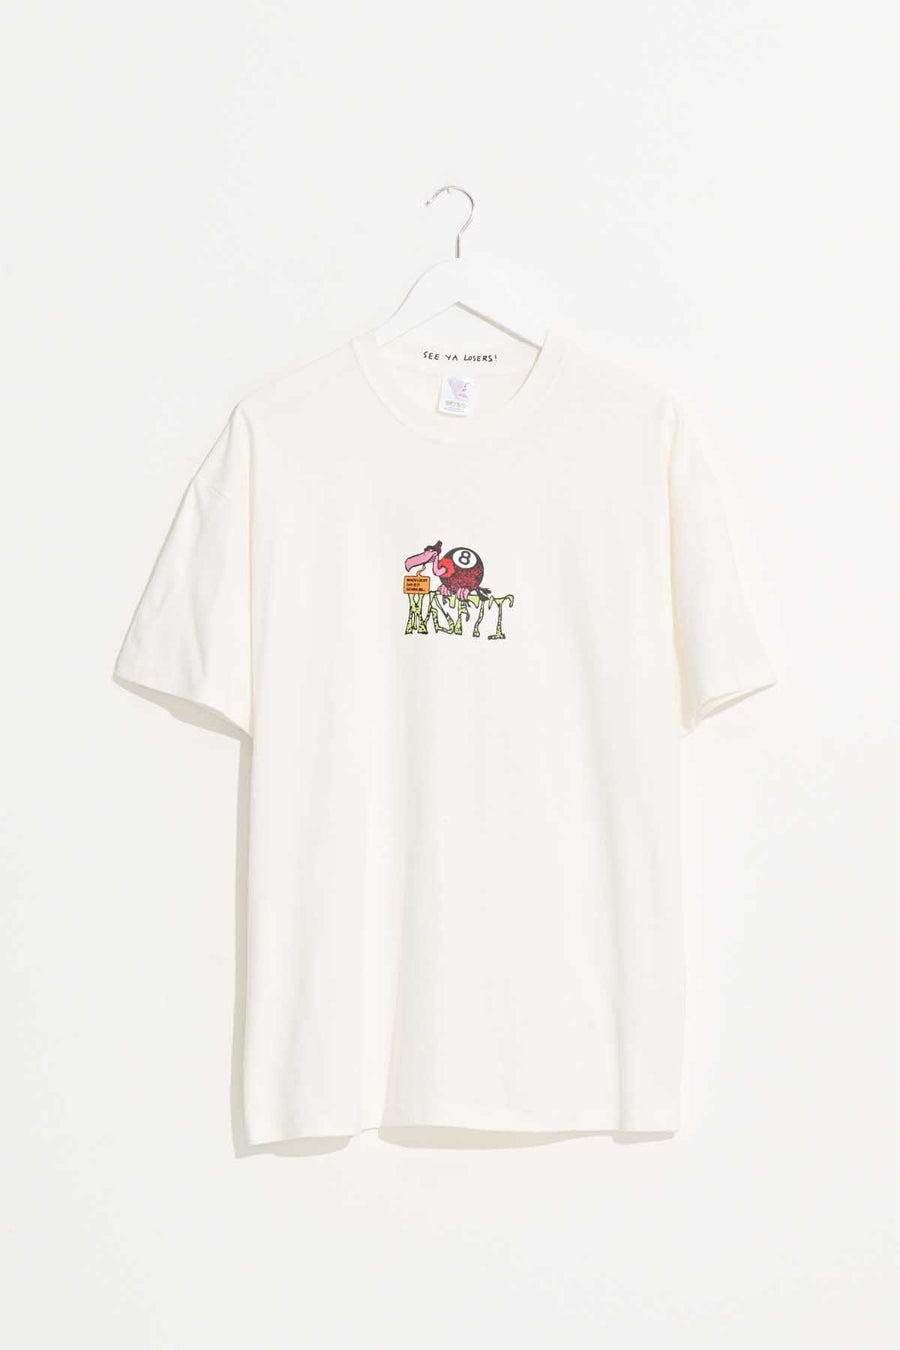 MISFIT SHEER LUCK SS TEE - PIGMENT THRIFT WHITE - WILDROSE